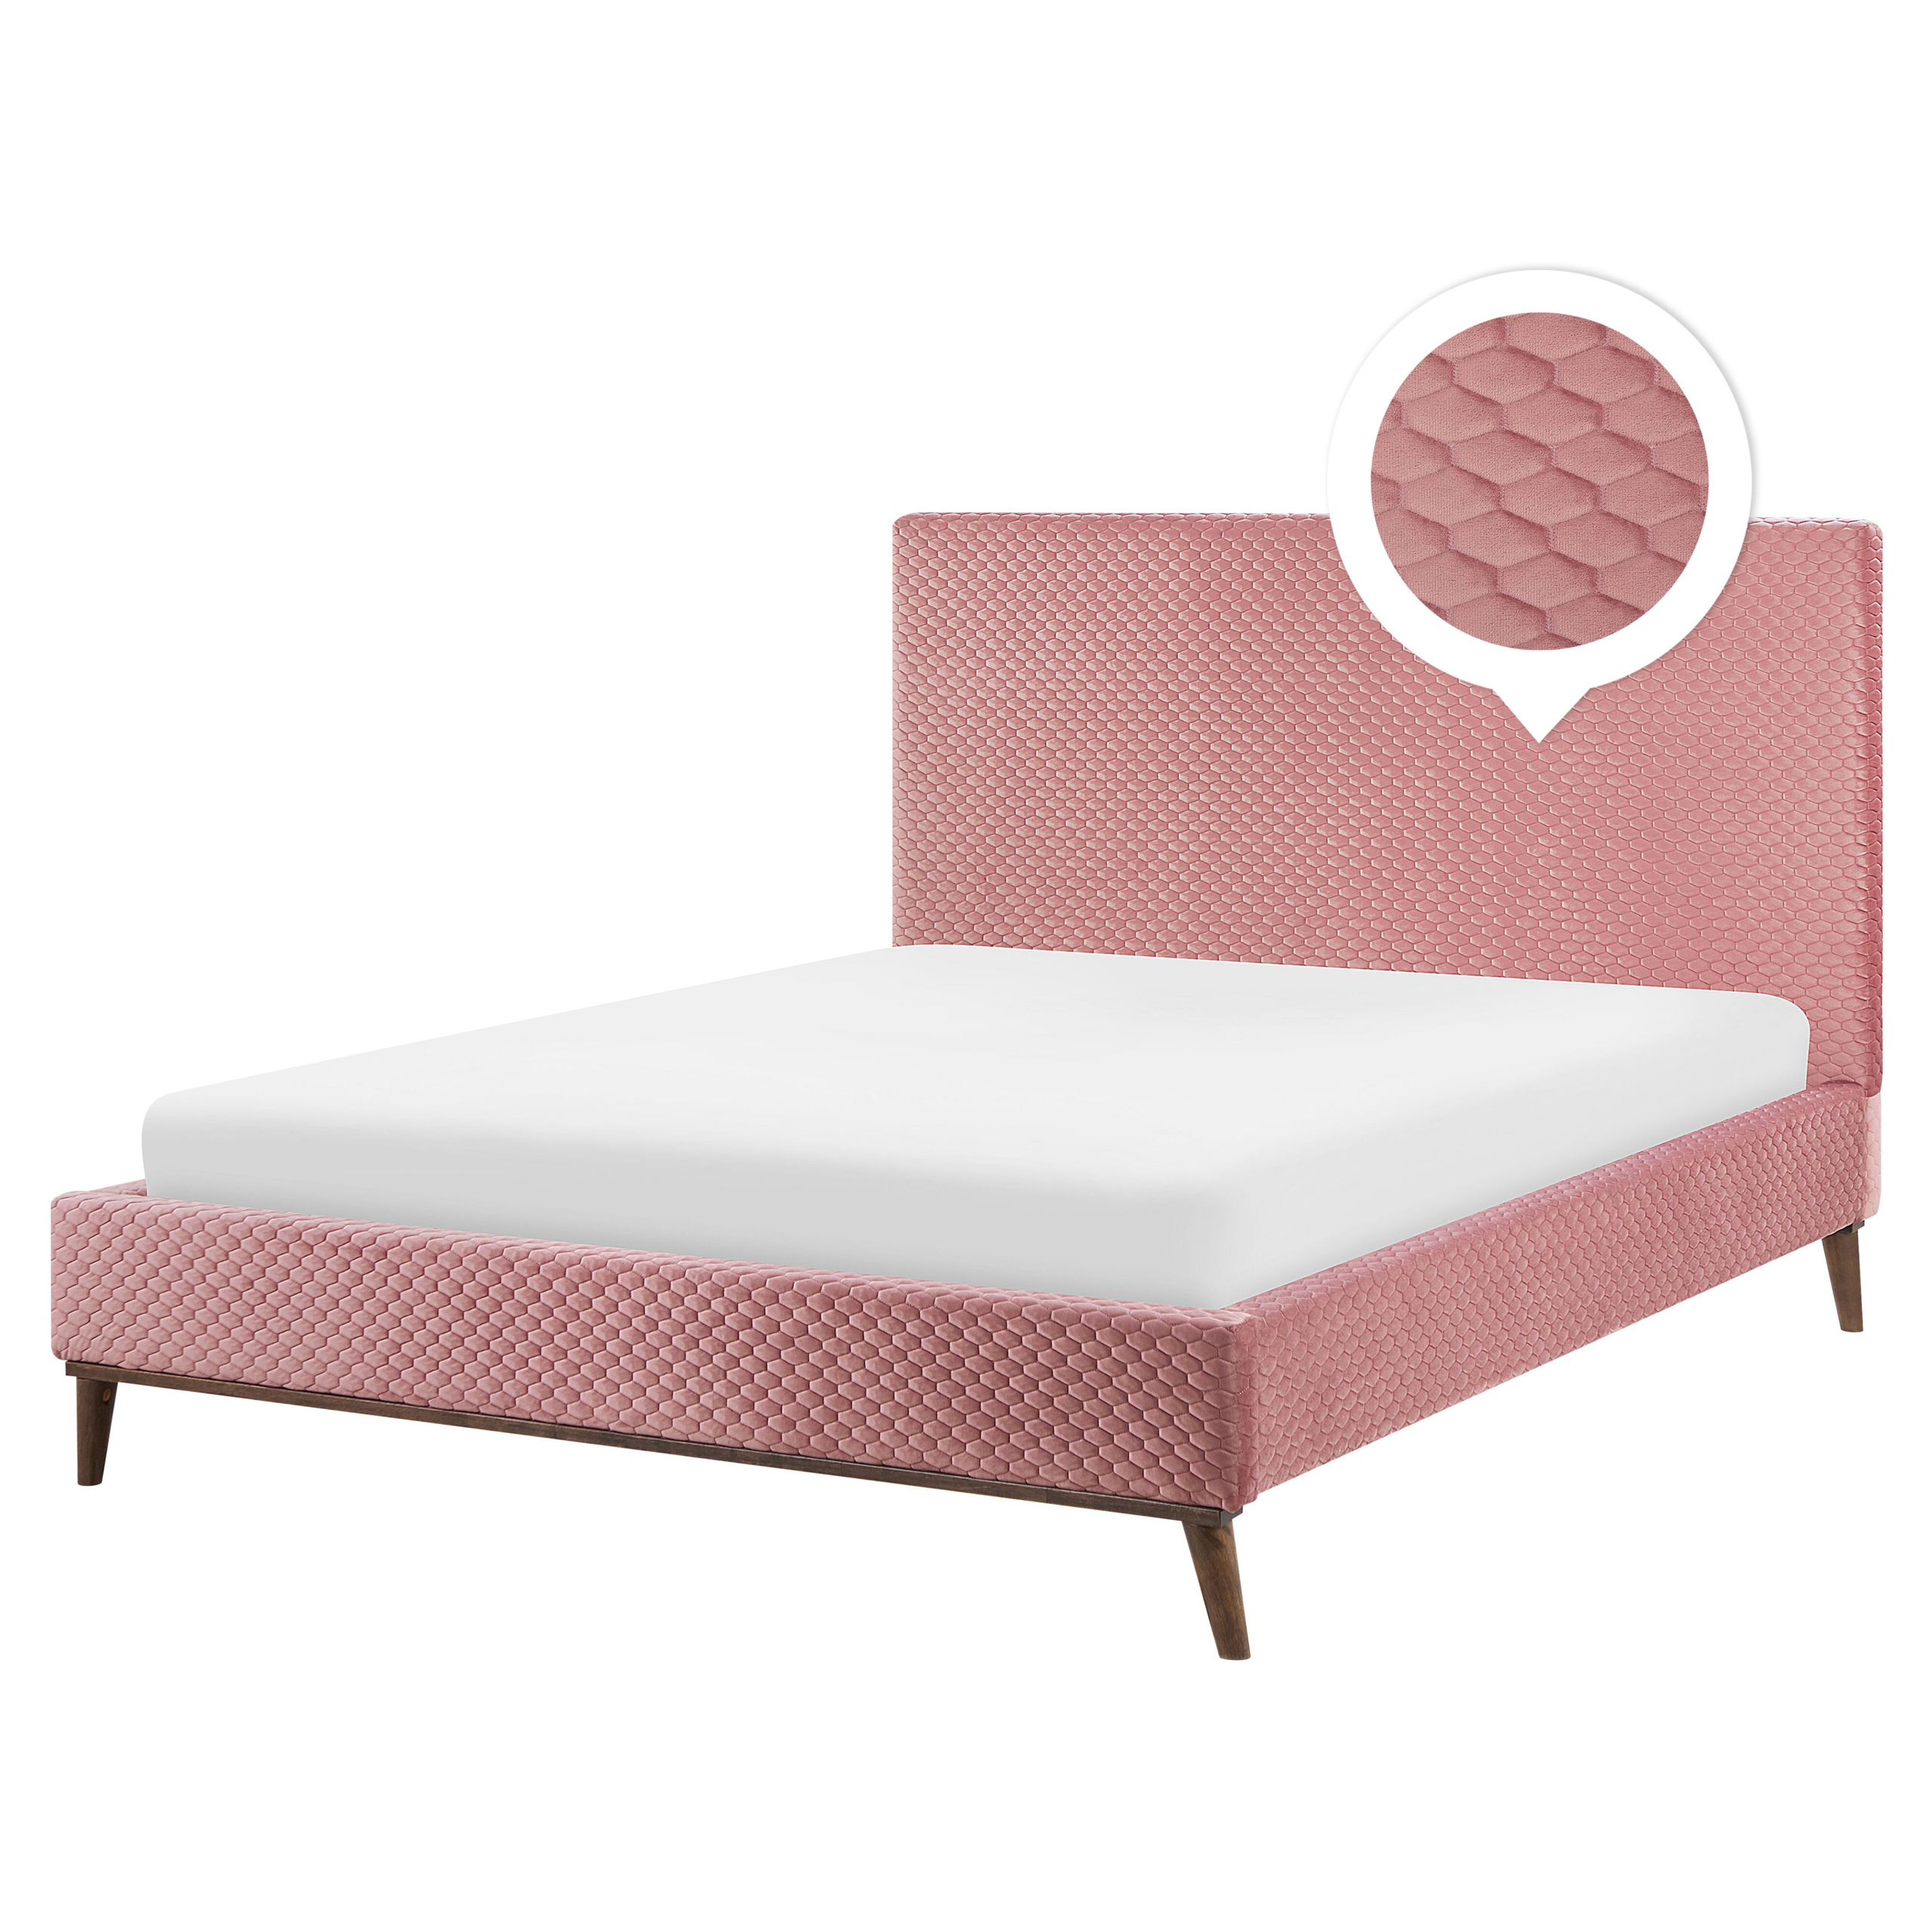 Beliani EU King Size Bed Pink Fabric 5ft3 Upholstered Frame Honeycomb Quilted